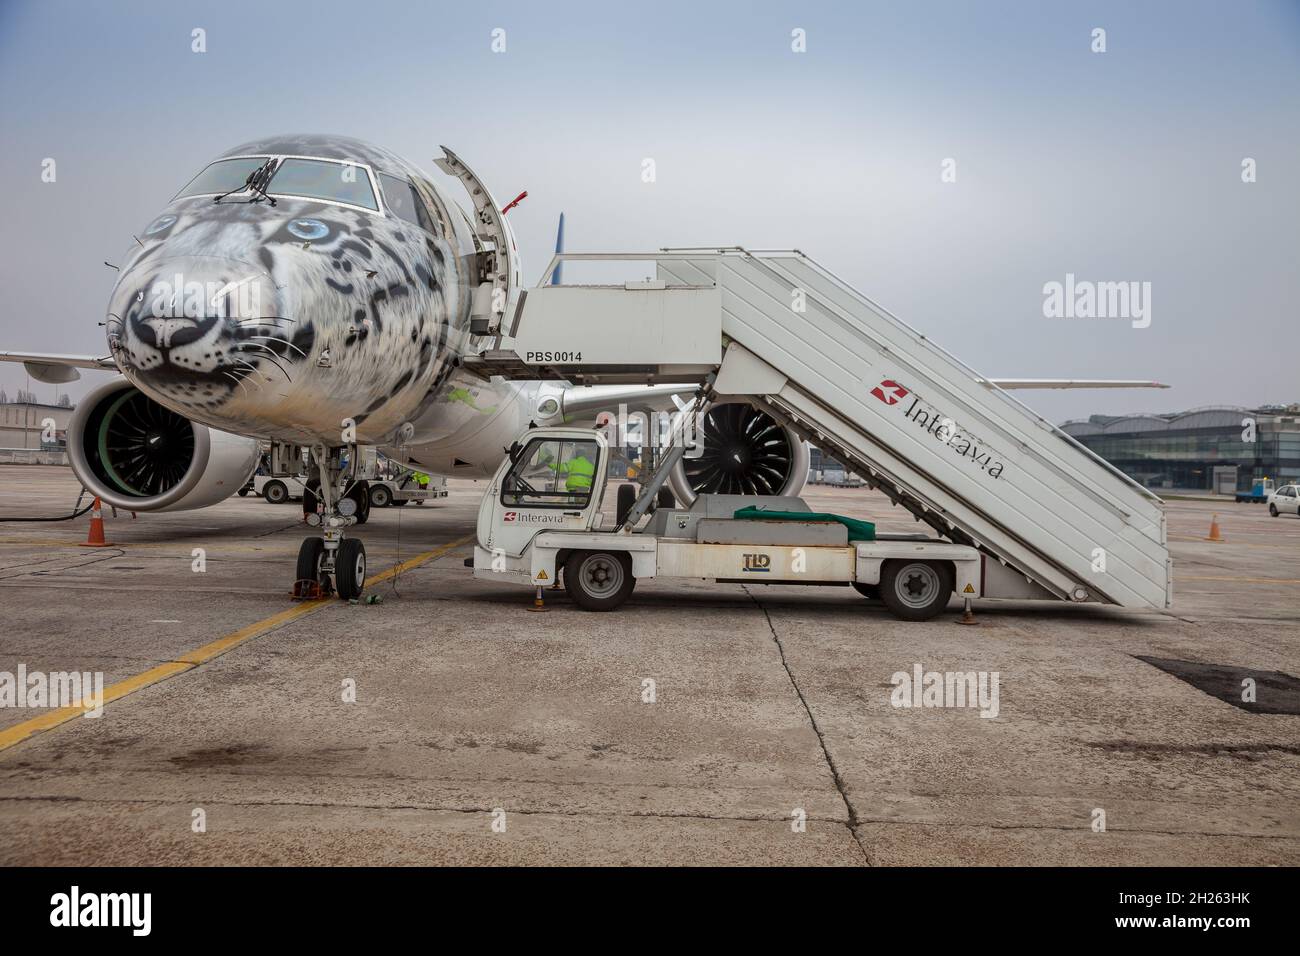 Kyiv, Ukraine - November 14, 2019: Airplane Embraer-190-E2 in the snow leopard livery. Airbrushing on the cockpit, livery - coloring by plane P4-KHA. Air Astana Kazakhstan. Fly in the Airport Stock Photo